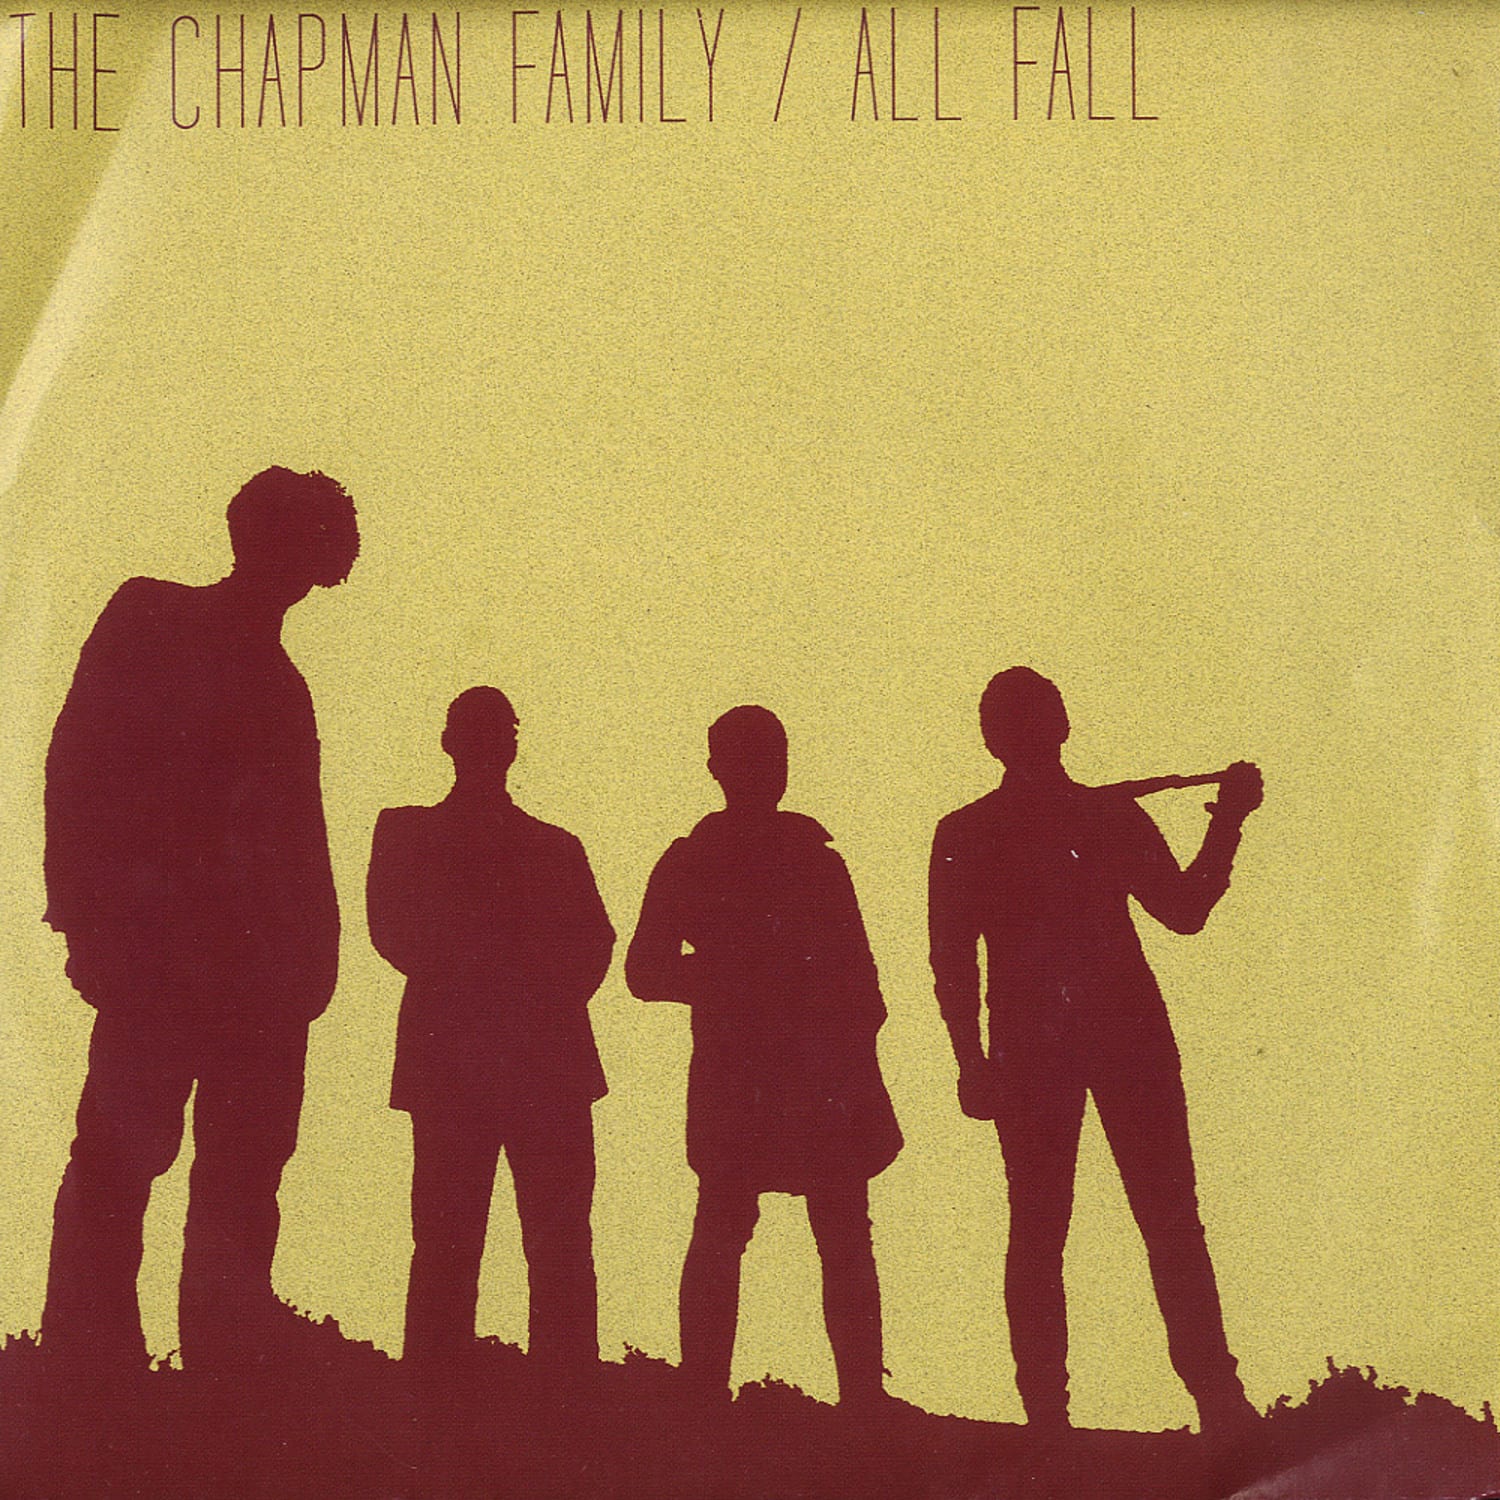 The Chapman - ALL FALL 